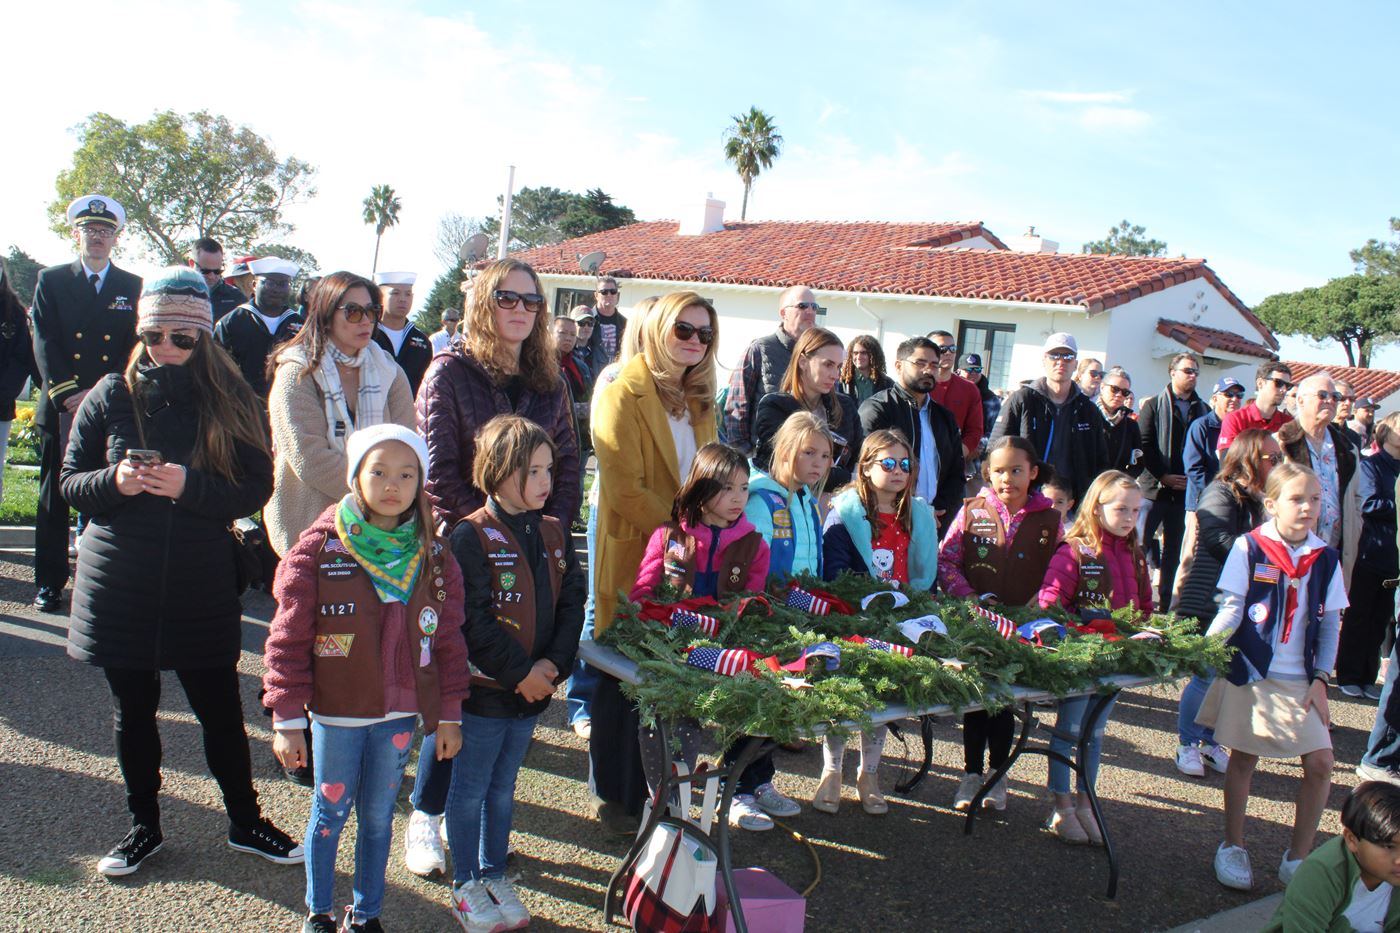 BROWNIES CARE FOR CEREMONIAL WREATHS FOR PRESENTATION